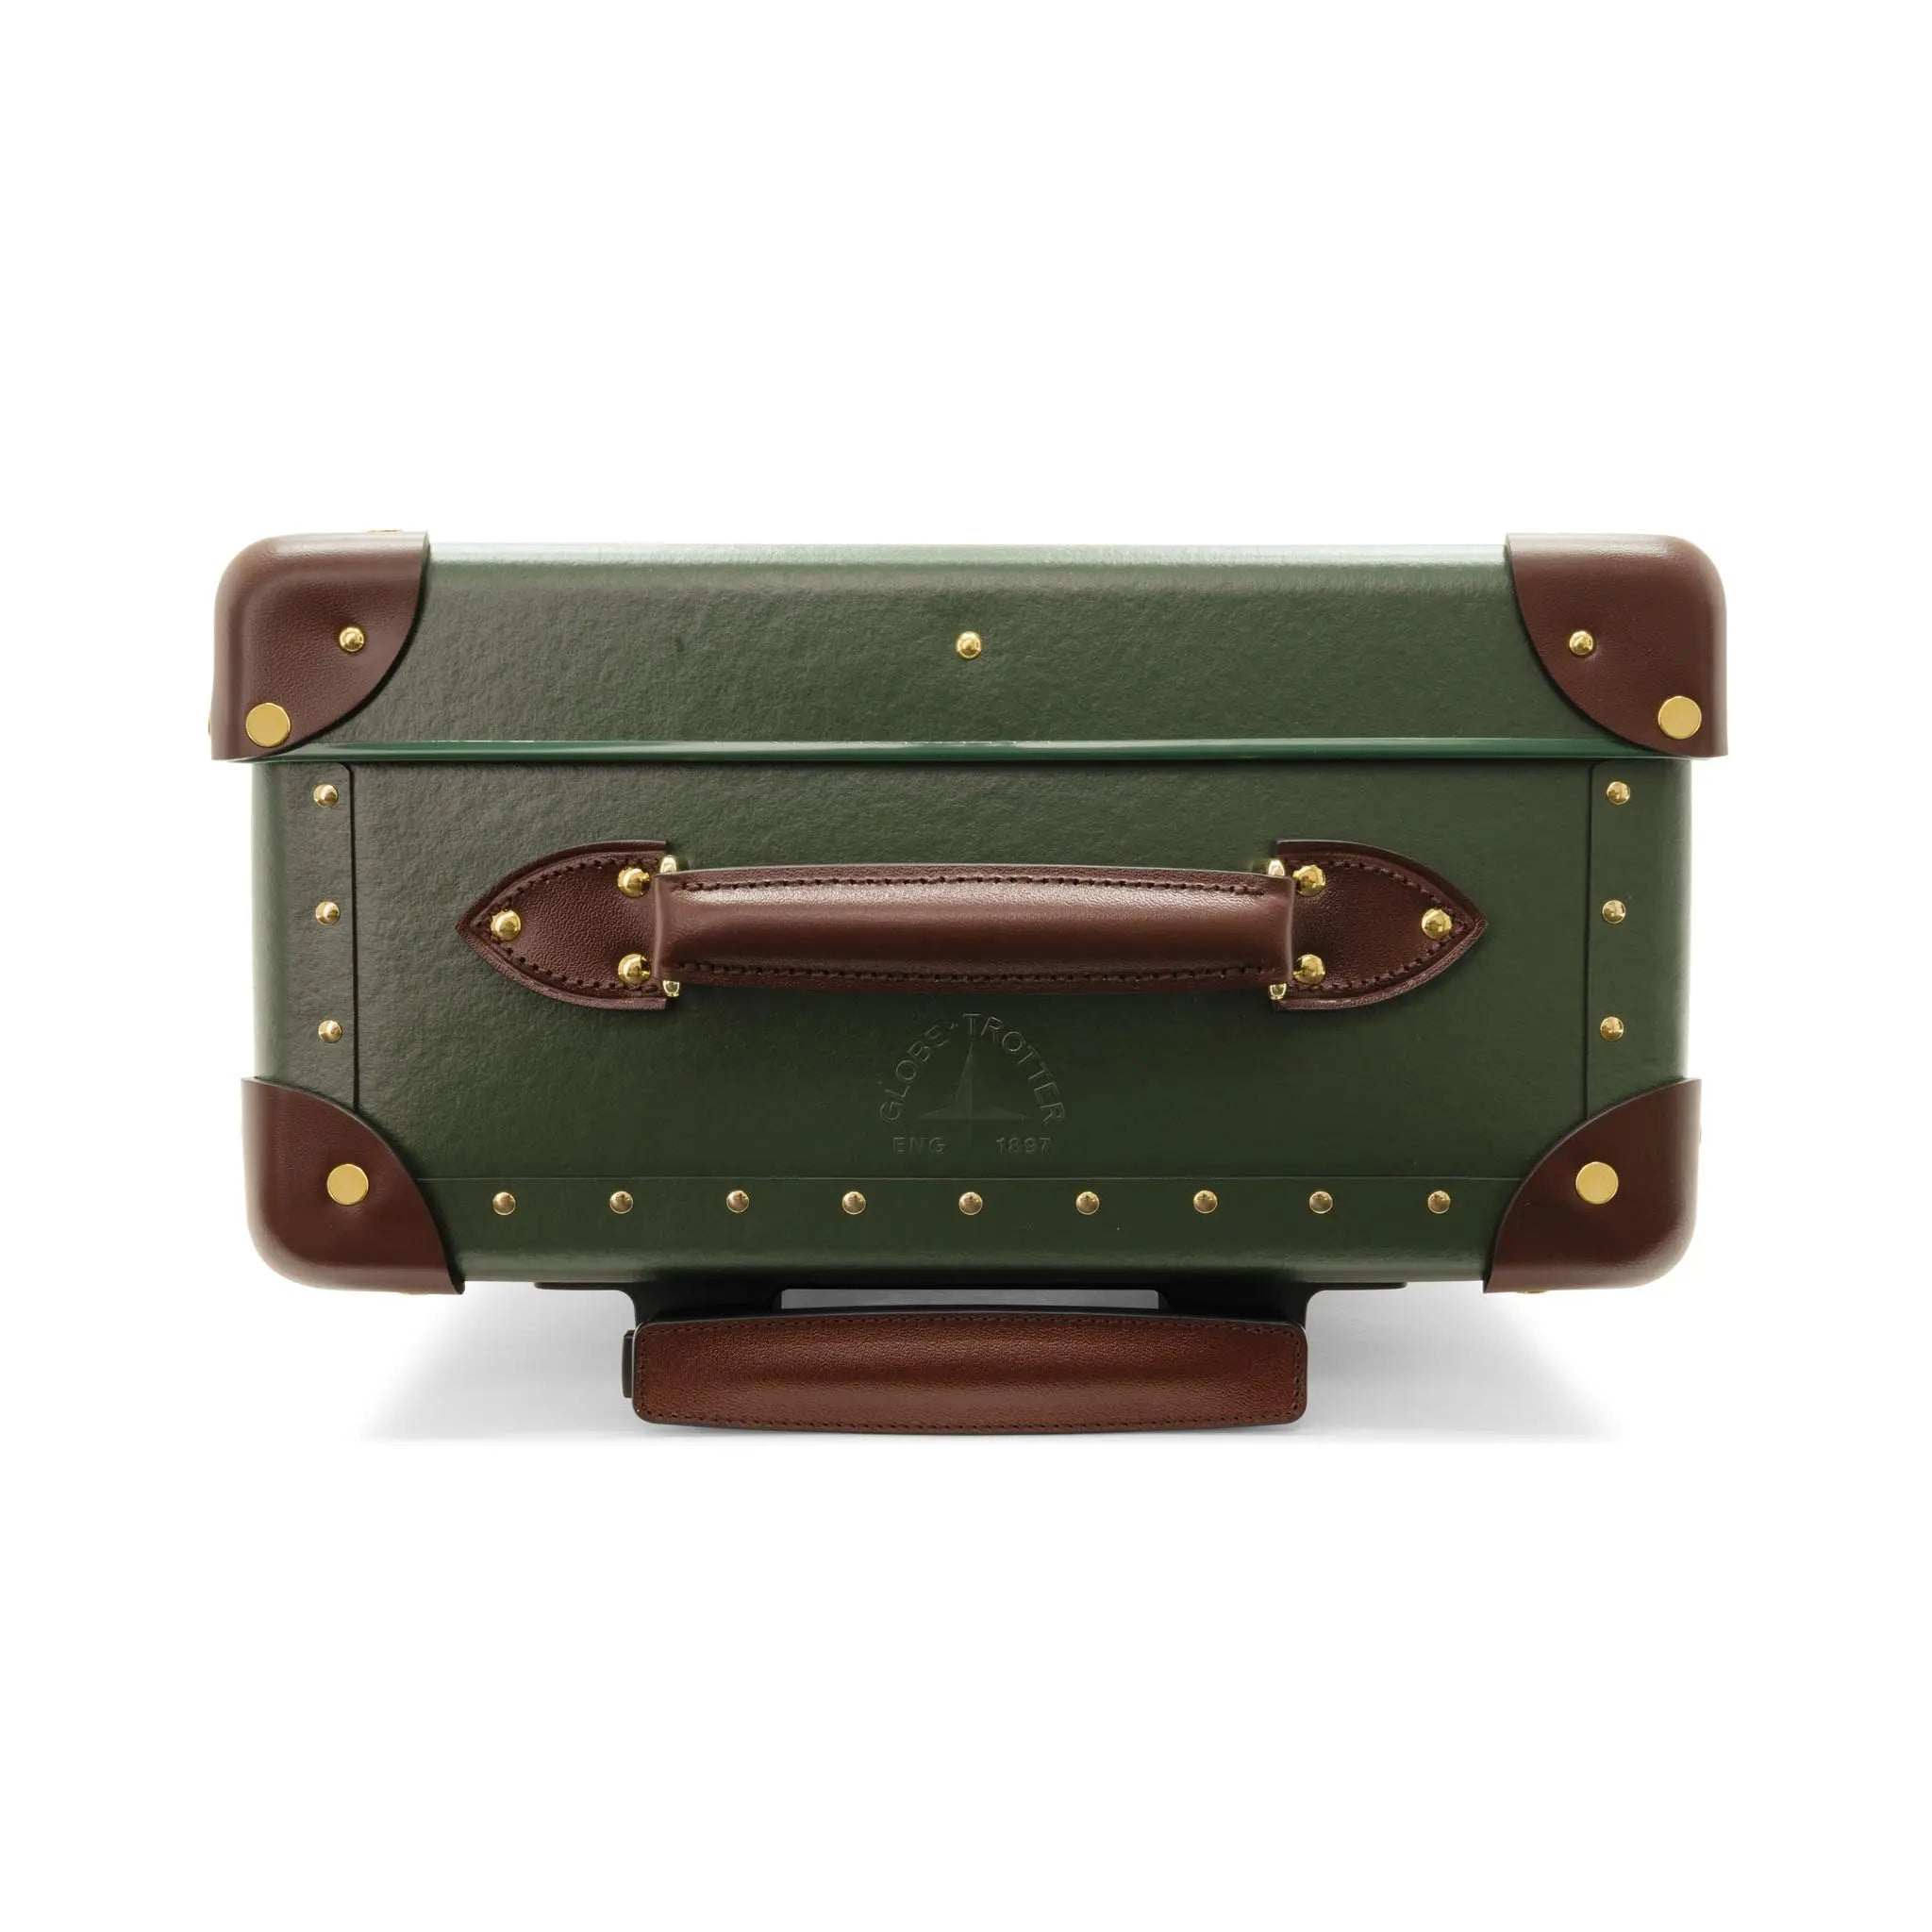 Centenary · Small Carry-On - 2 Wheels | Green/Brown/Gold - GLOBE-TROTTER